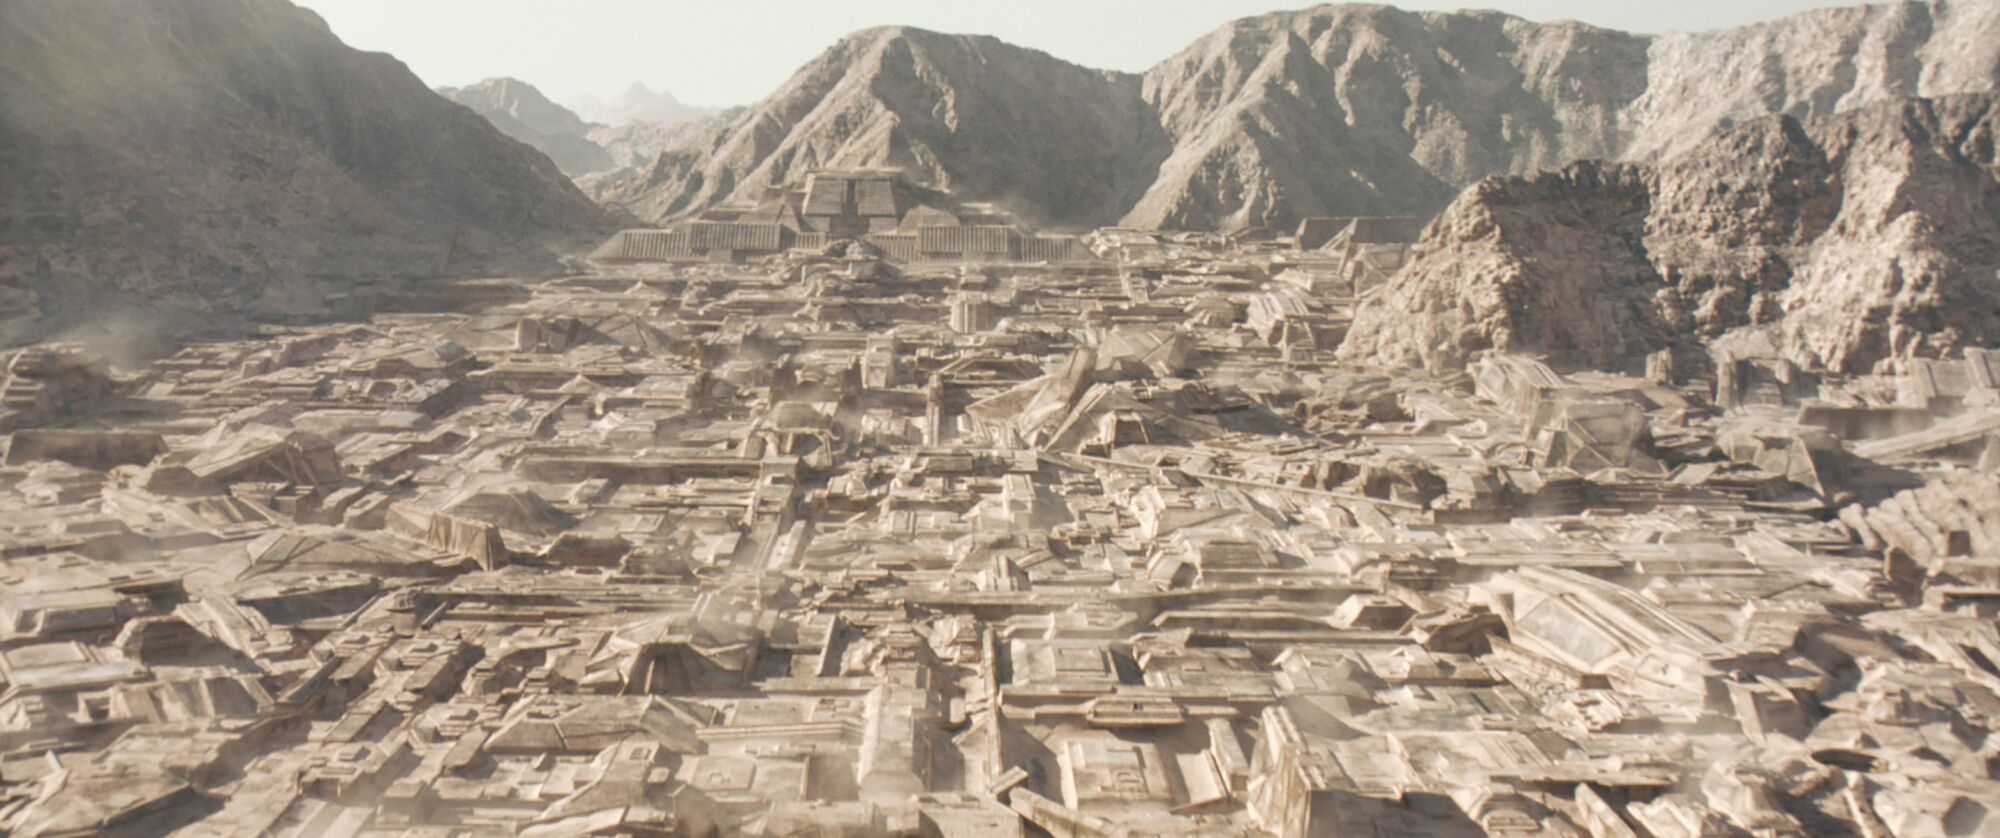 A wide overview of the dull grays and browns of the city of Arrakeen in "Dune."